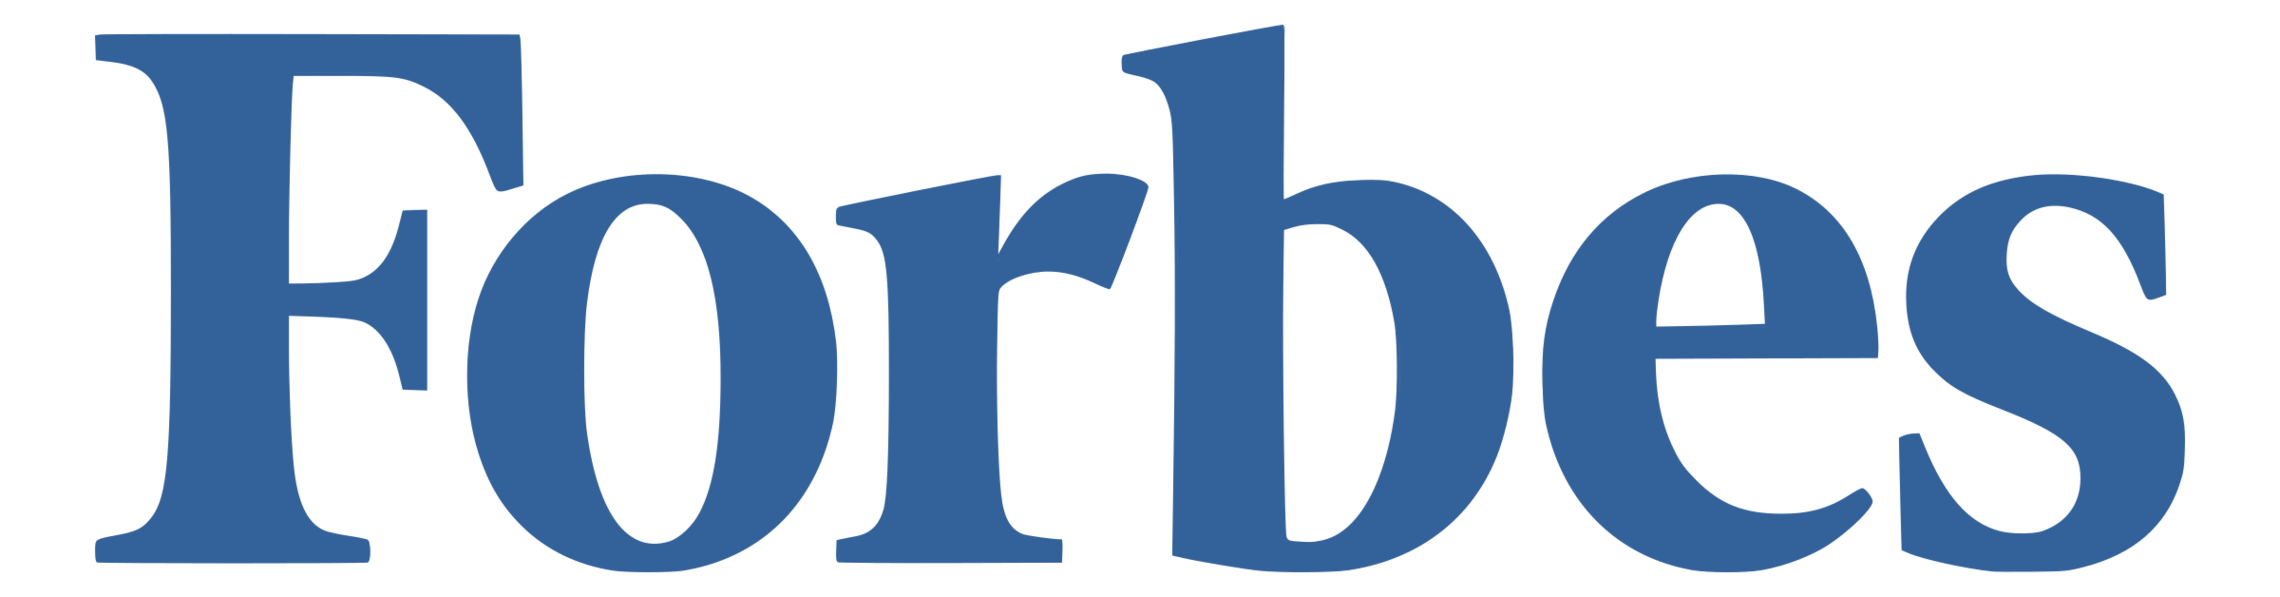 Forbes Logo PNG Pic